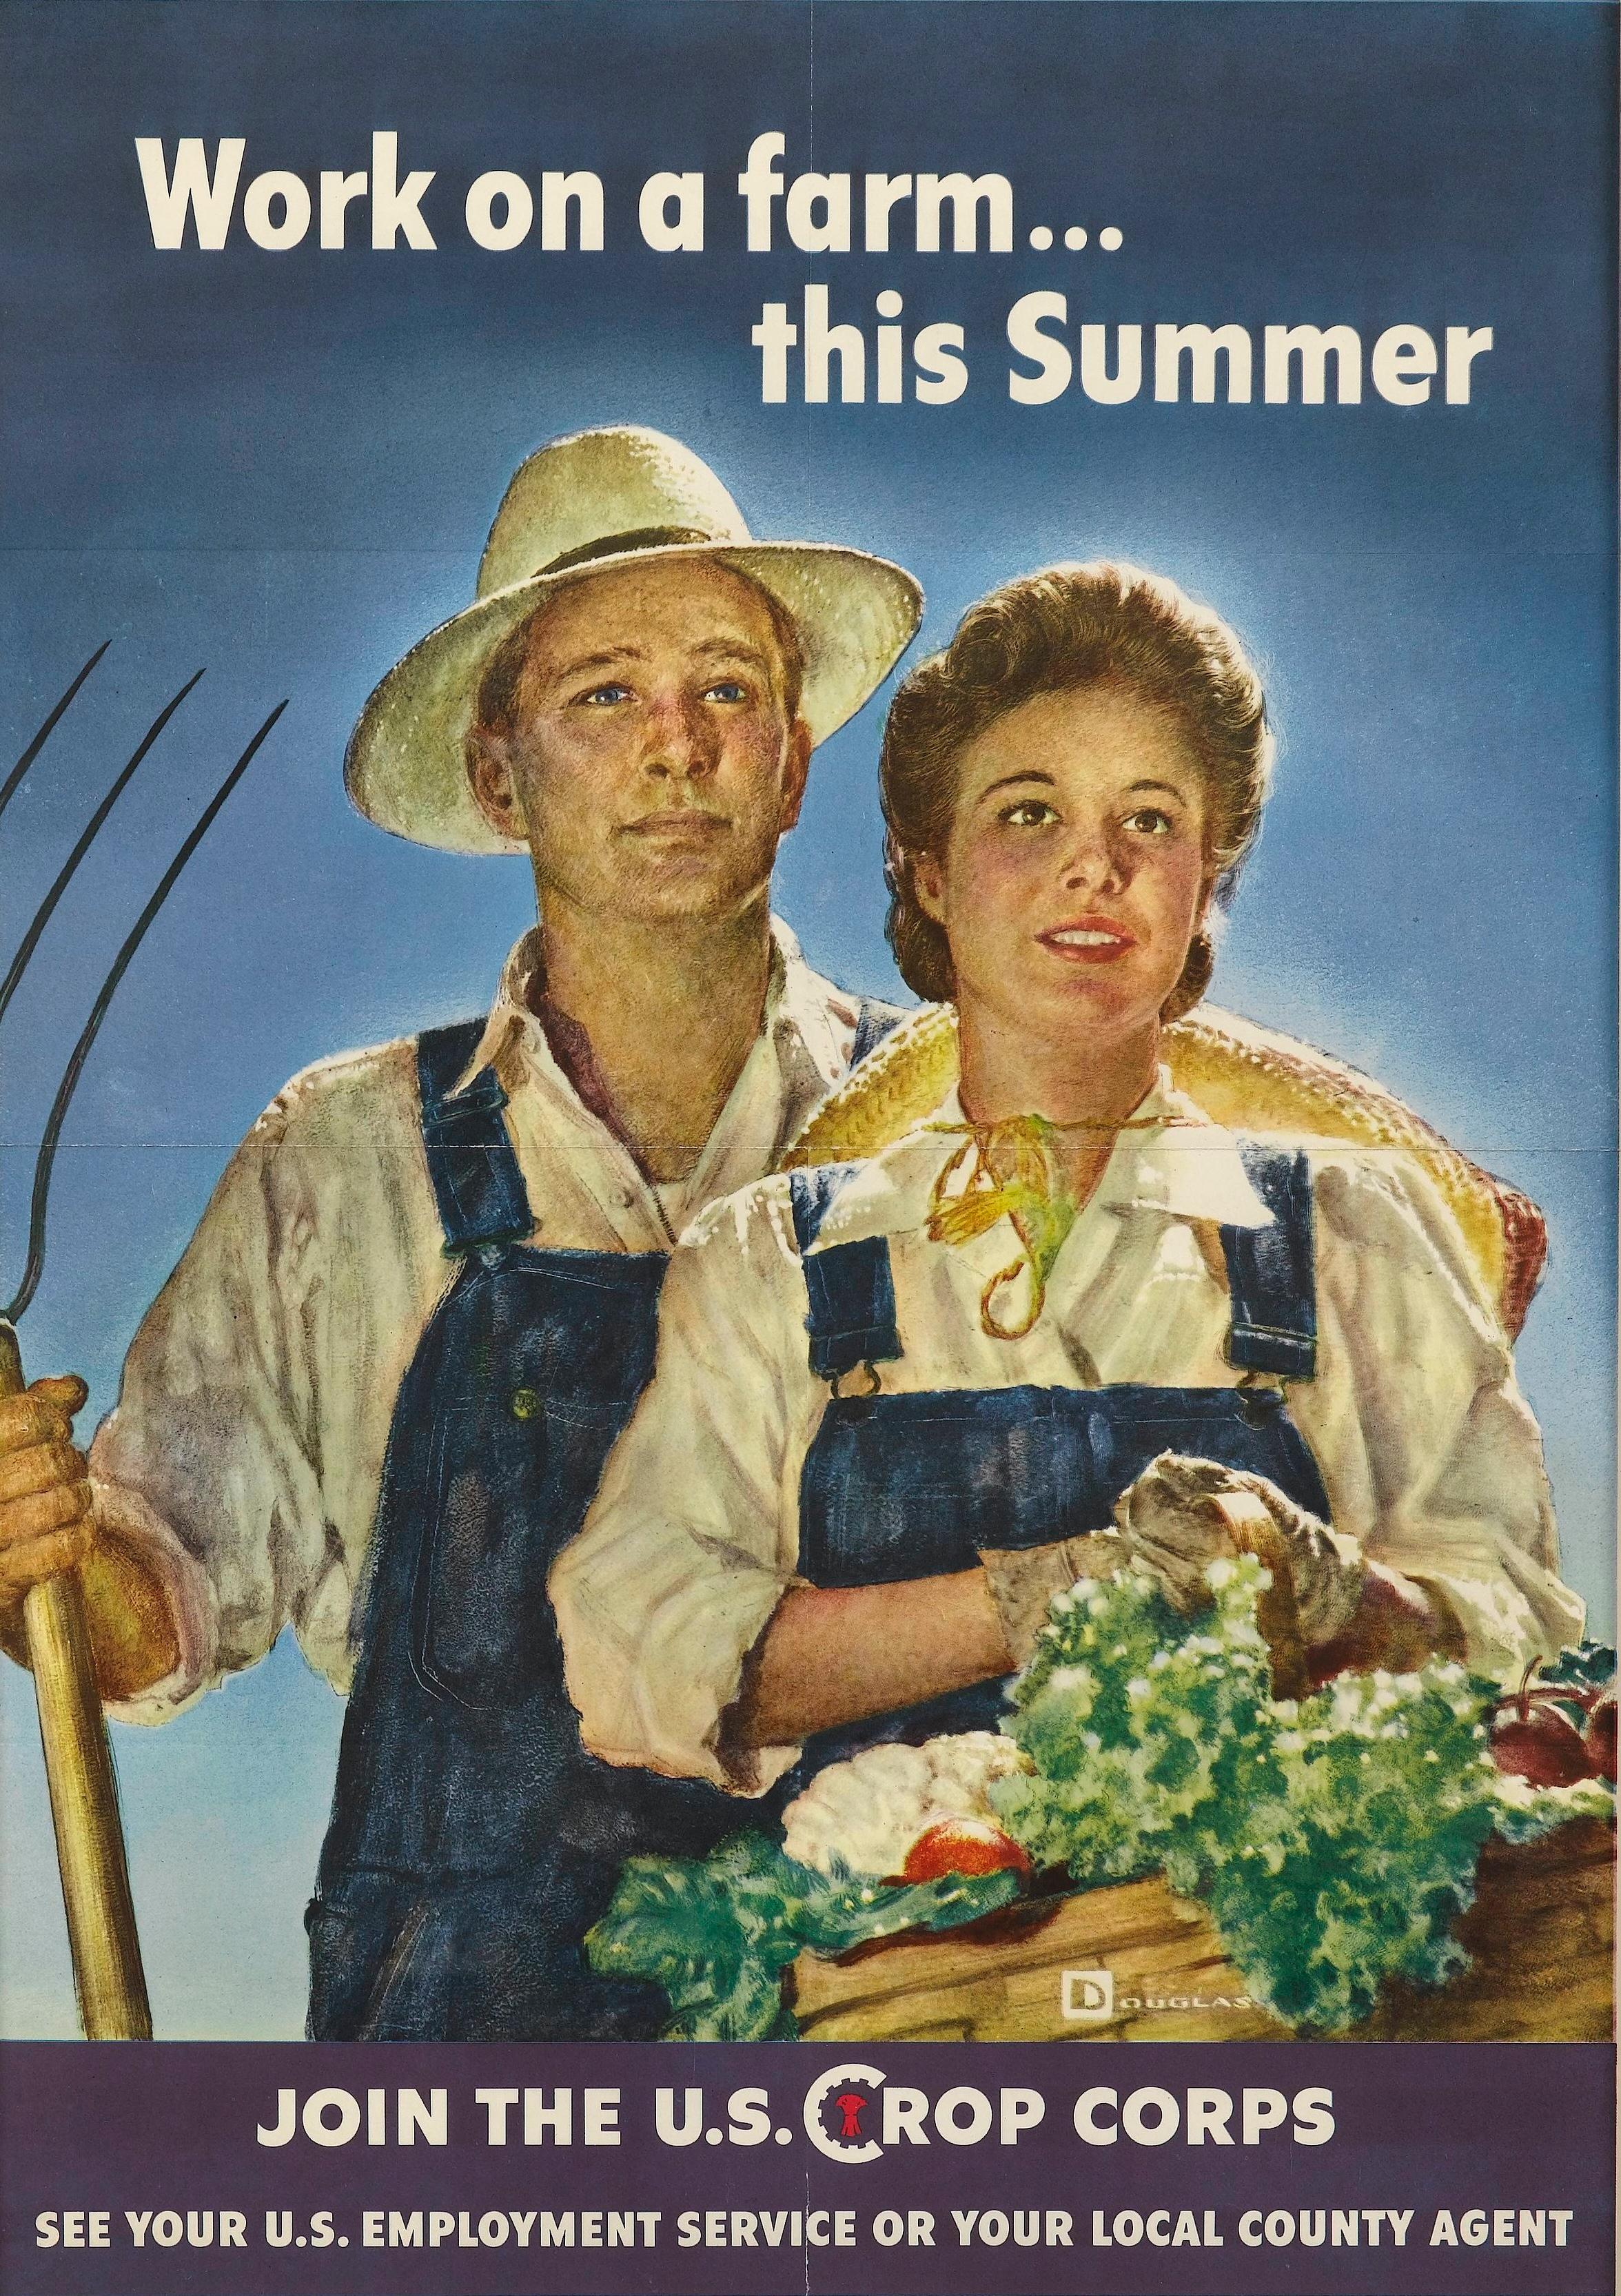 Presented is an original WWII U.S. Crop Corps recruitment poster. Designed by Douglas, this poster was issued by the Office of War Information in Washington DC, in 1943. In the composition, a man holds a pitchfork while a woman holds a basket with